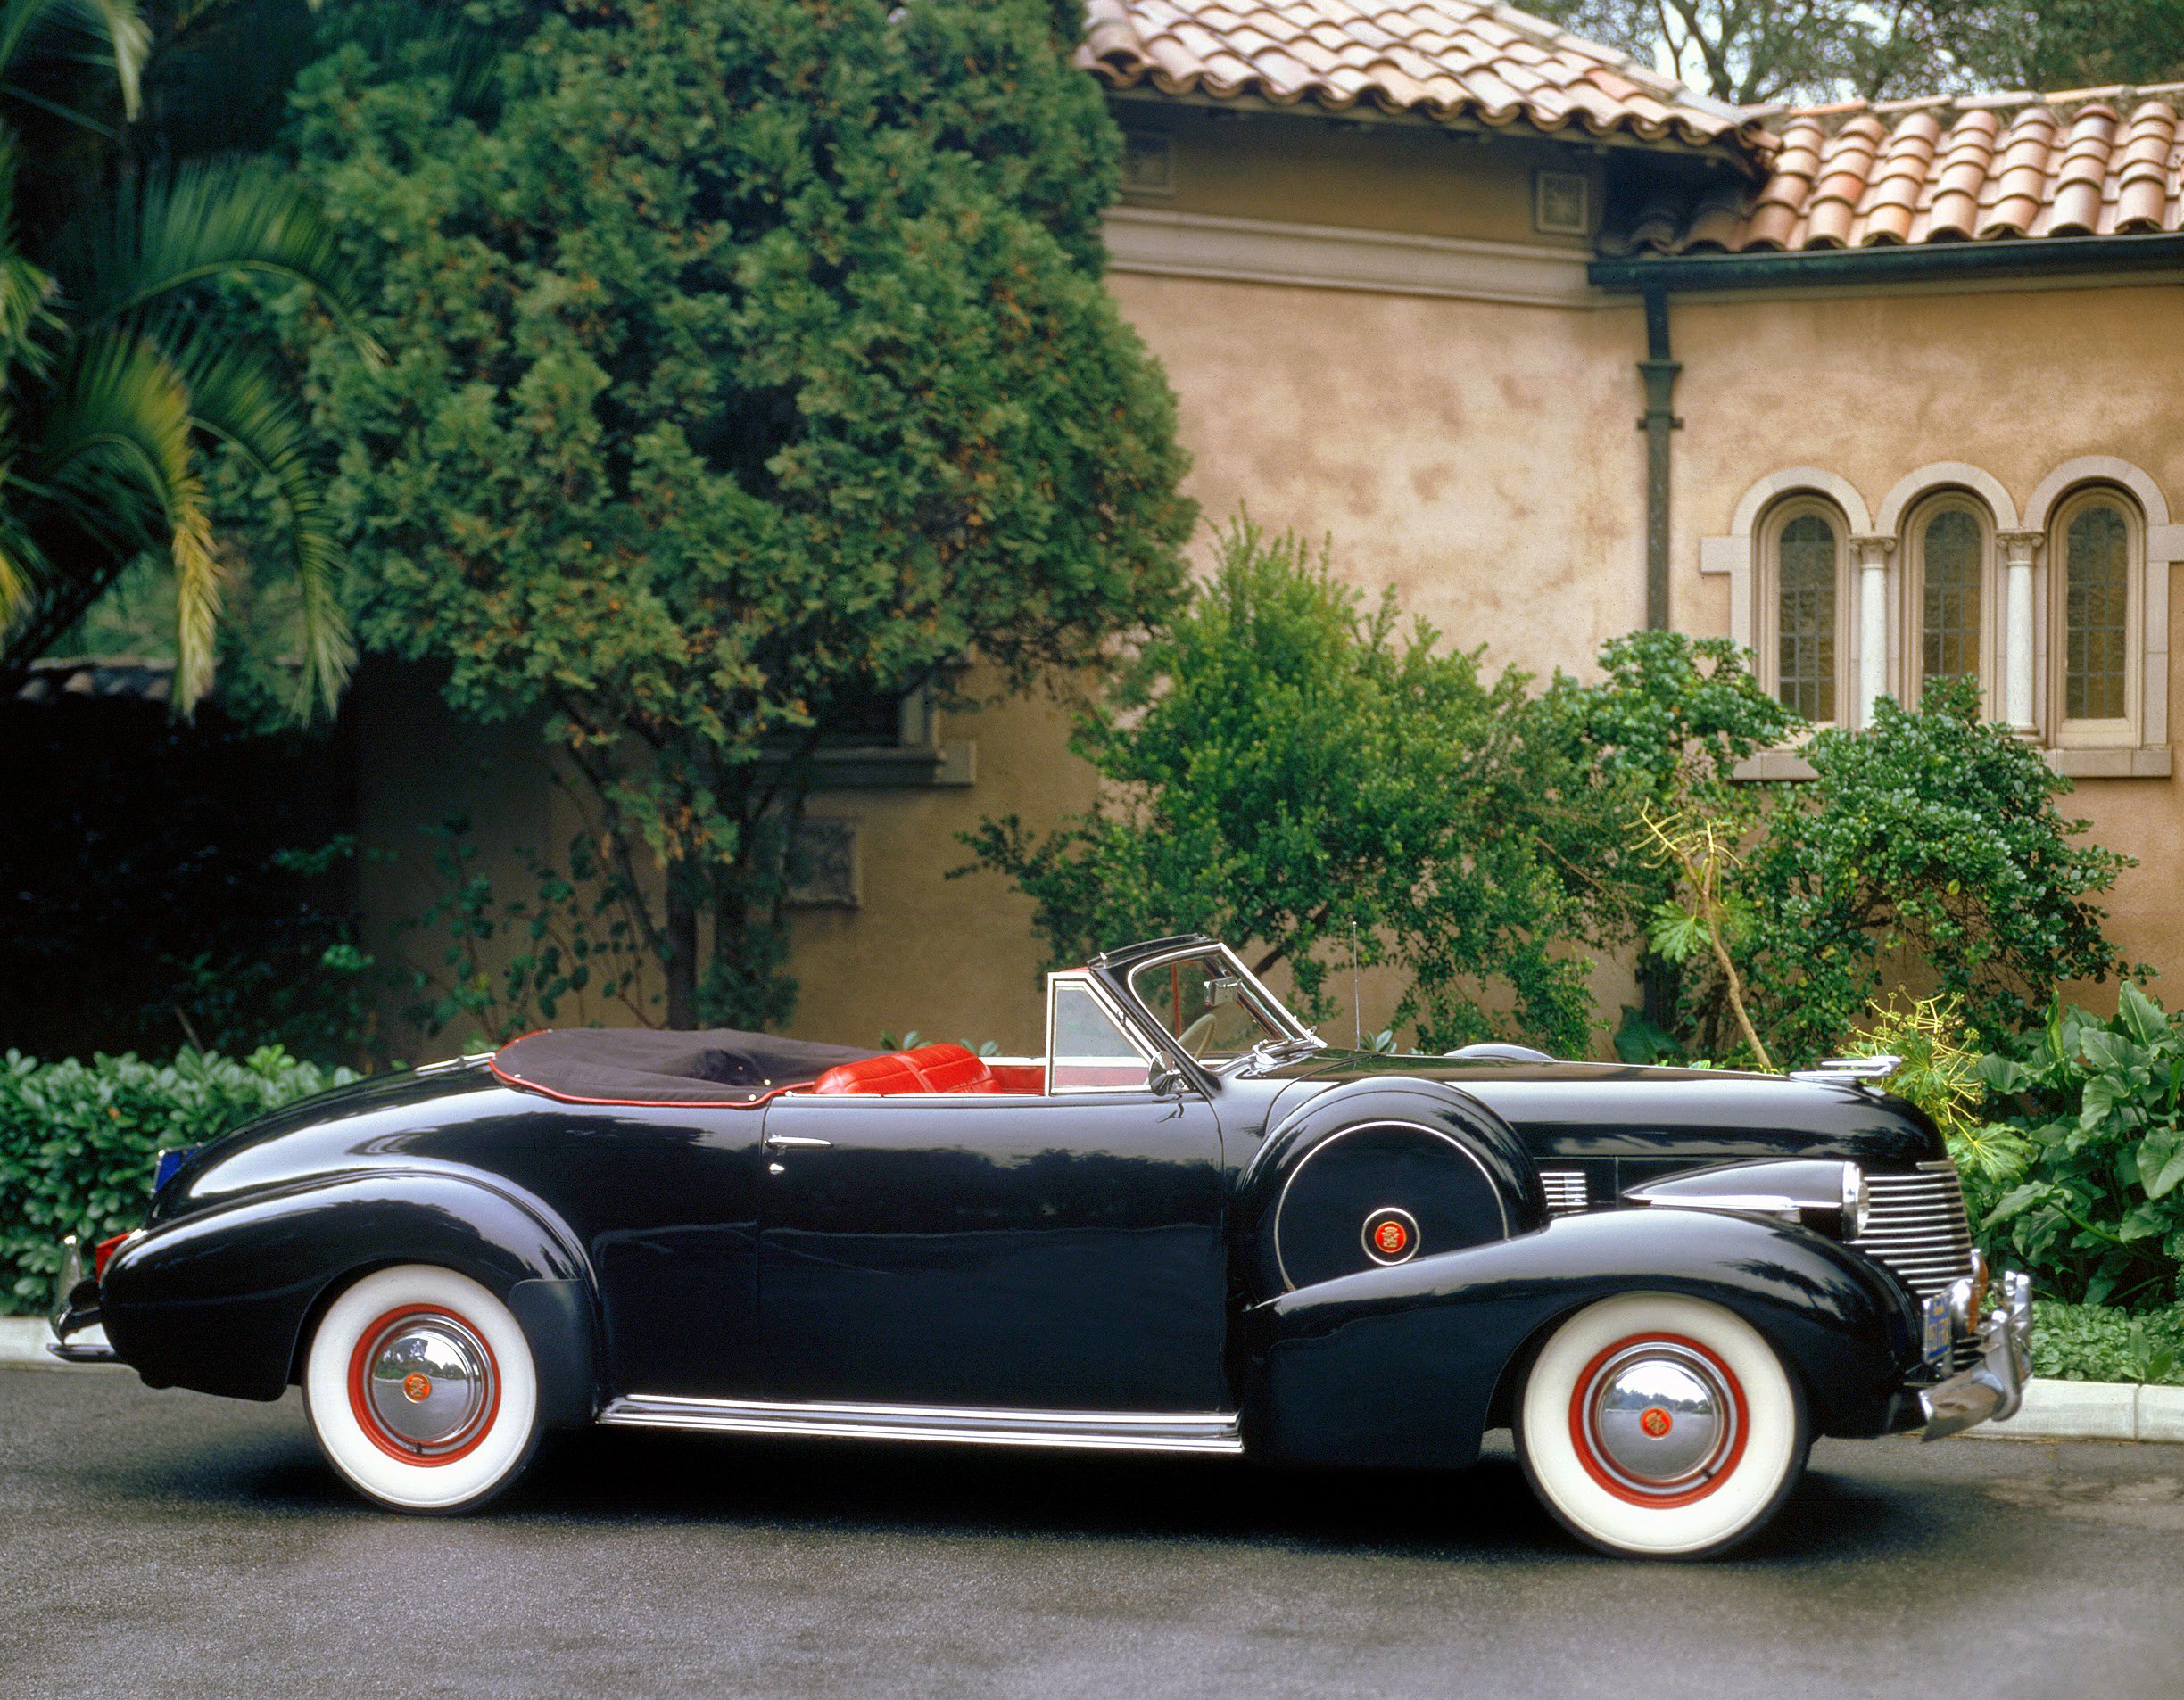 1940, Cadillac, Sixty two, Convertible, Coupe, 40 6267, Luxury, Retro Wallpaper